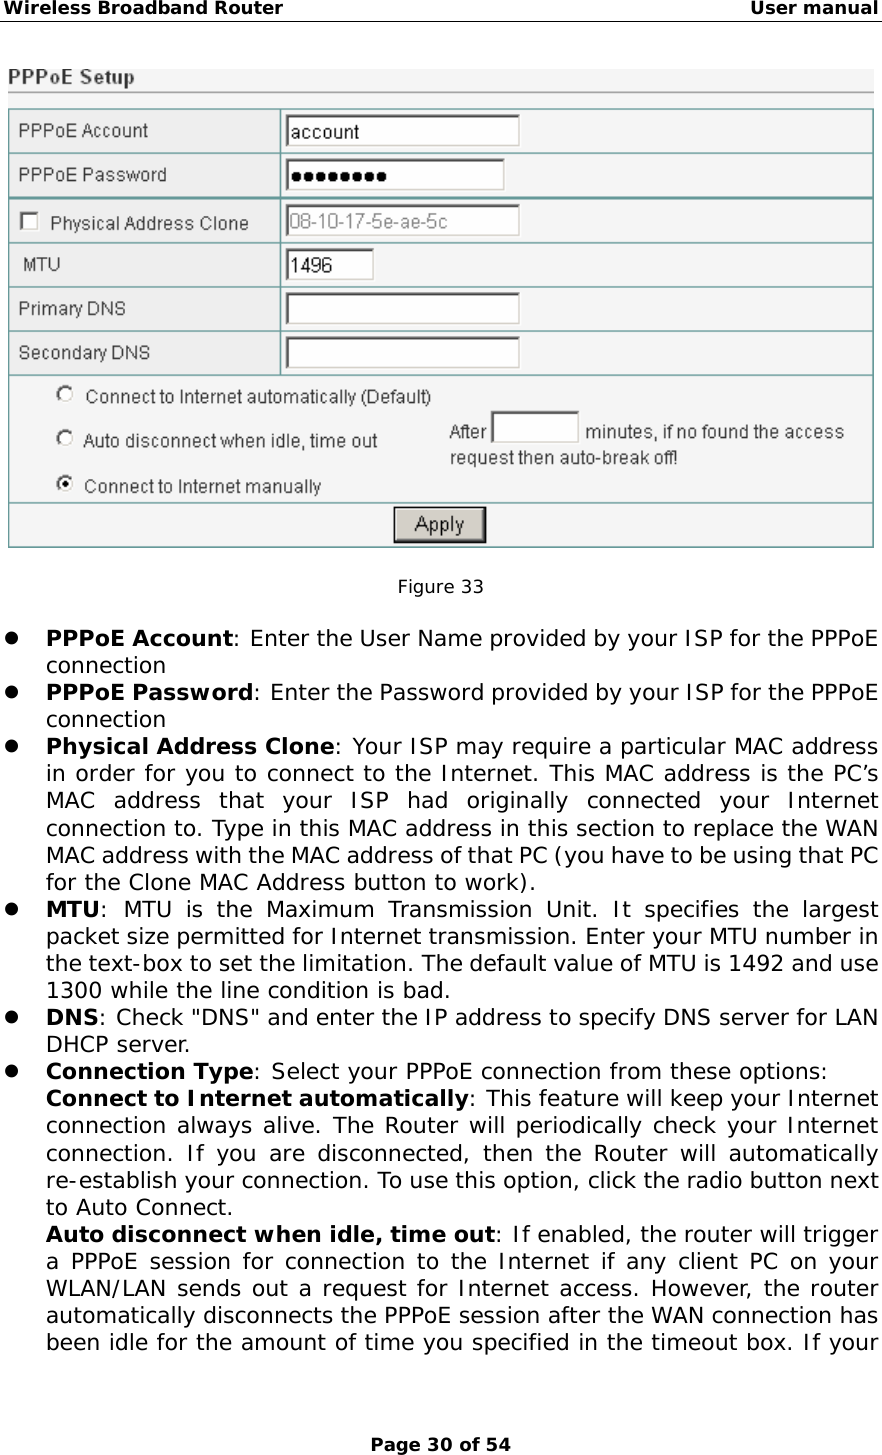 Wireless Broadband Router                                                   User manual Page 30 of 54   Figure 33  z PPPoE Account: Enter the User Name provided by your ISP for the PPPoE connection z PPPoE Password: Enter the Password provided by your ISP for the PPPoE connection z Physical Address Clone: Your ISP may require a particular MAC address in order for you to connect to the Internet. This MAC address is the PC’s MAC address that your ISP had originally connected your Internet connection to. Type in this MAC address in this section to replace the WAN MAC address with the MAC address of that PC (you have to be using that PC for the Clone MAC Address button to work). z MTU: MTU is the Maximum Transmission Unit. It specifies the largest packet size permitted for Internet transmission. Enter your MTU number in the text-box to set the limitation. The default value of MTU is 1492 and use 1300 while the line condition is bad. z DNS: Check &quot;DNS&quot; and enter the IP address to specify DNS server for LAN DHCP server. z Connection Type: Select your PPPoE connection from these options: Connect to Internet automatically: This feature will keep your Internet connection always alive. The Router will periodically check your Internet connection. If you are disconnected, then the Router will automatically re-establish your connection. To use this option, click the radio button next to Auto Connect. Auto disconnect when idle, time out: If enabled, the router will trigger a PPPoE session for connection to the Internet if any client PC on your WLAN/LAN sends out a request for Internet access. However, the router automatically disconnects the PPPoE session after the WAN connection has been idle for the amount of time you specified in the timeout box. If your 